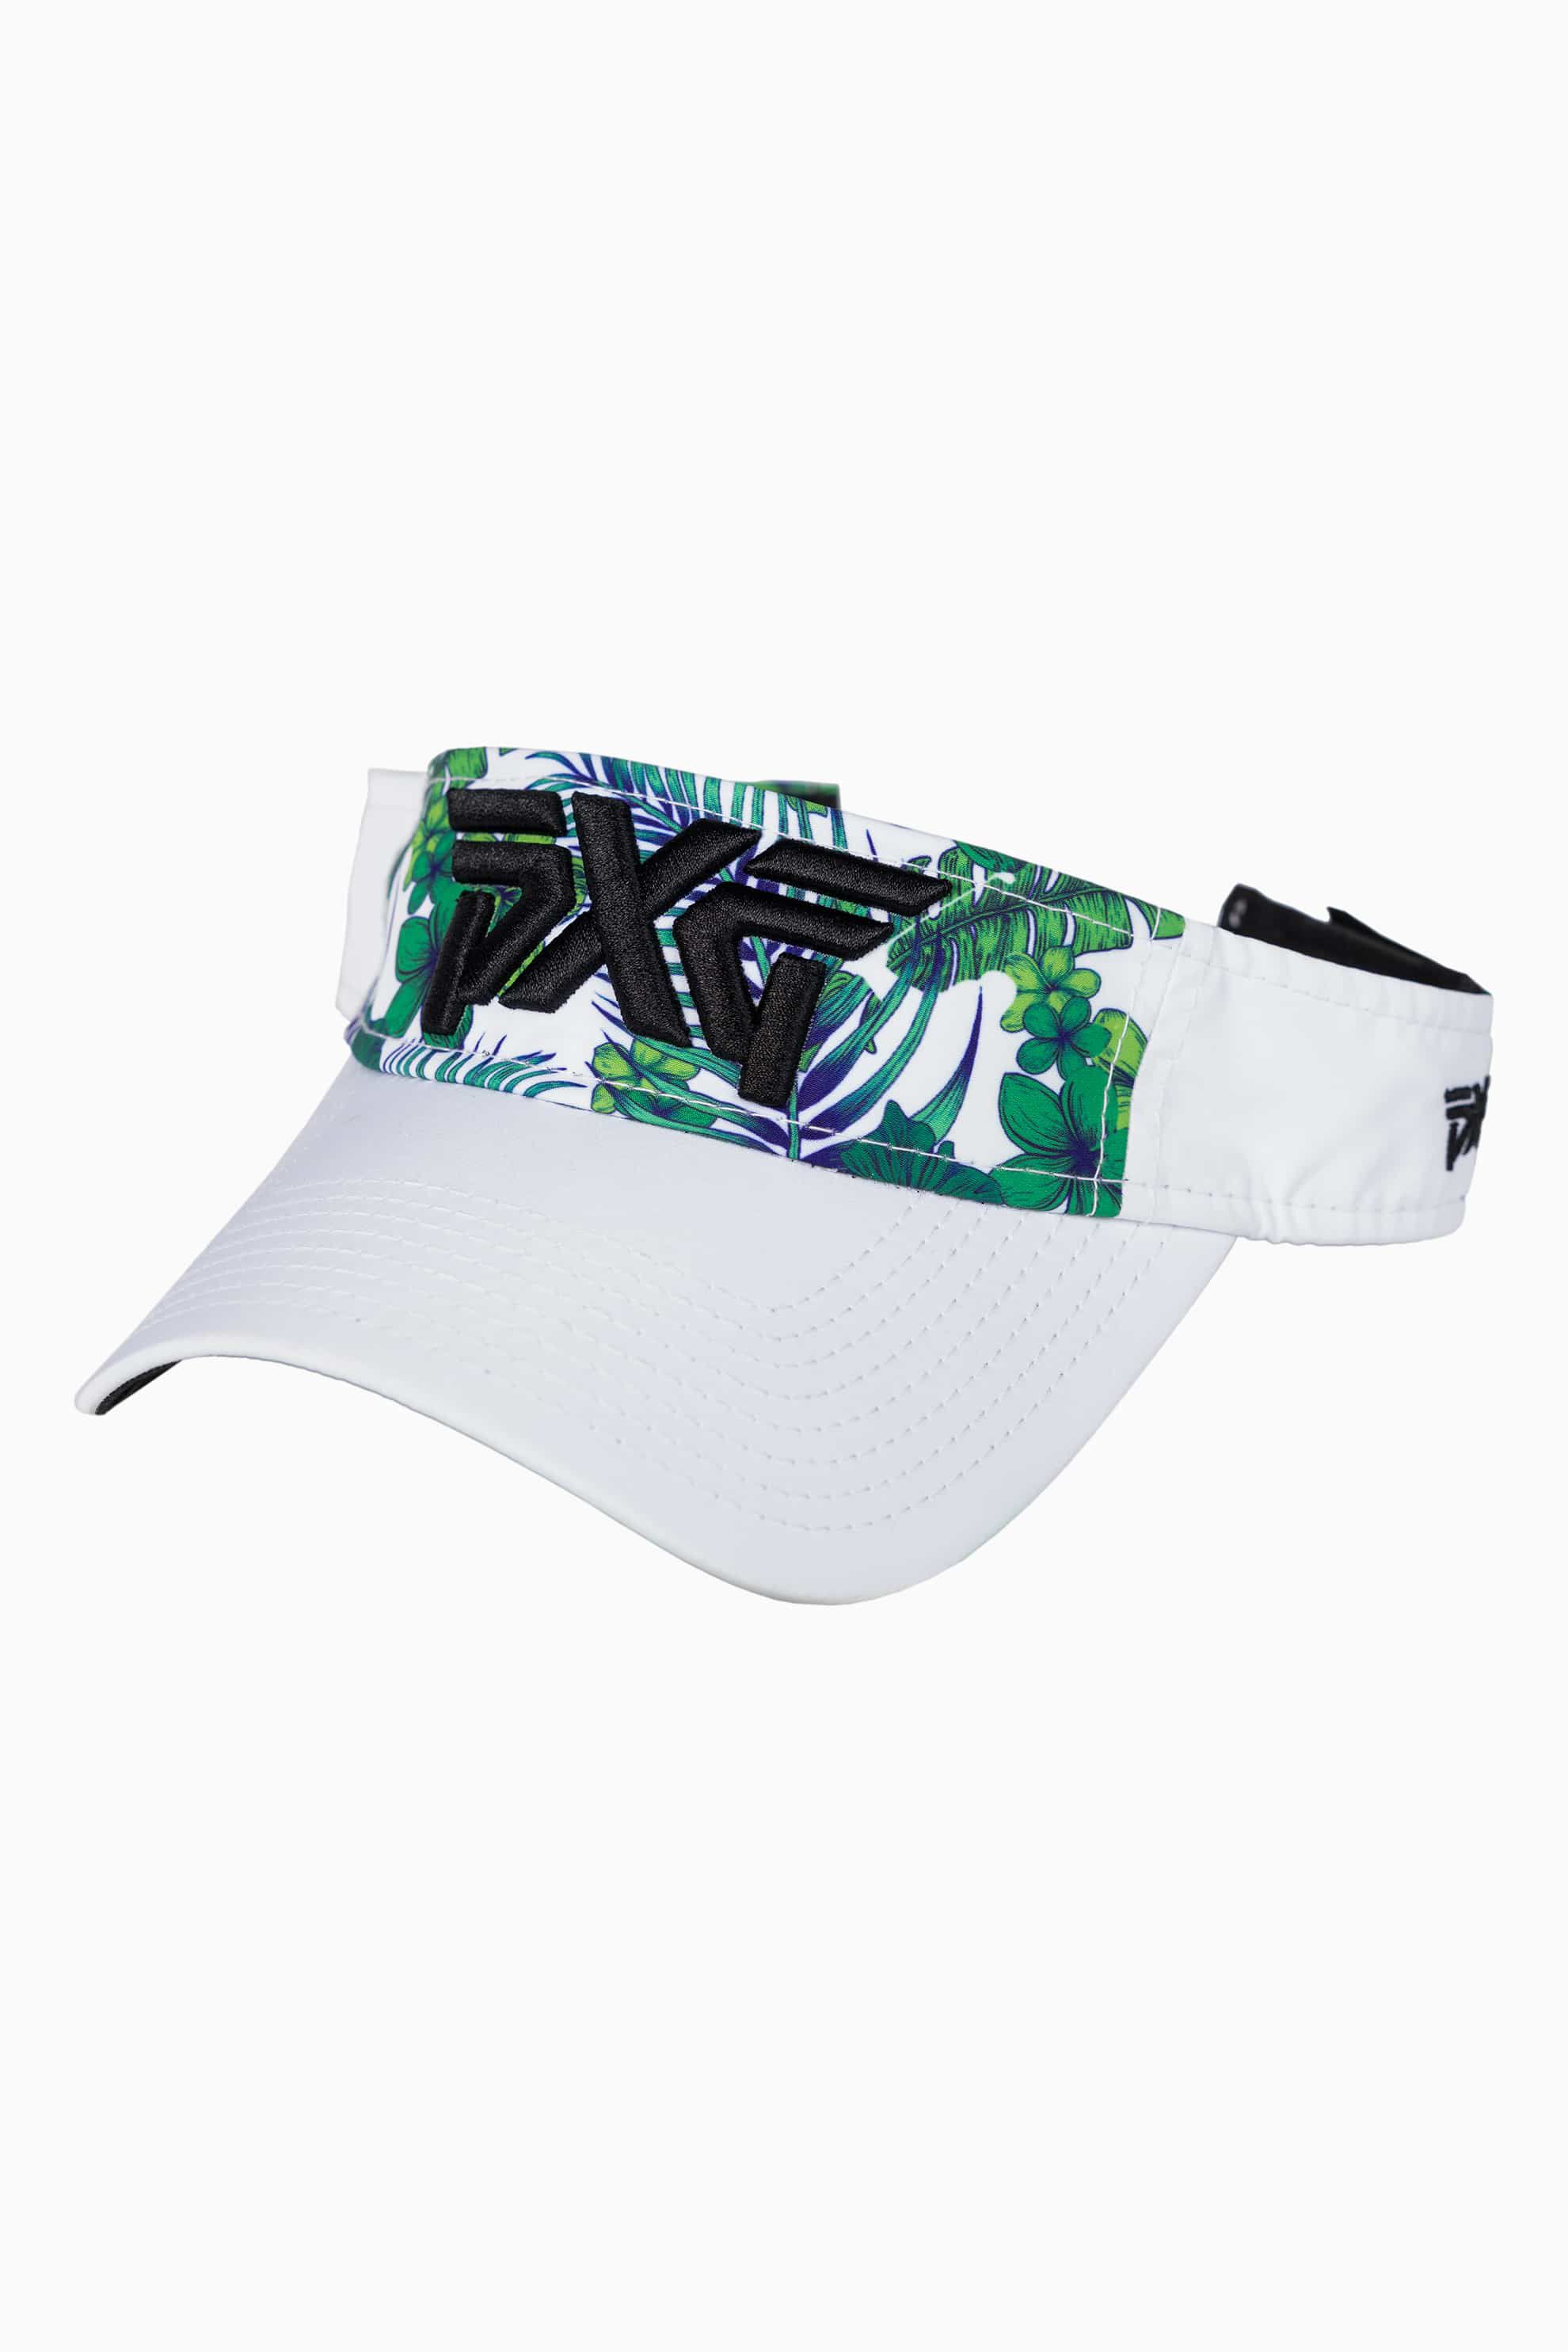 Aloha 23 Sport Visor Shop the Highest Quality Golf Apparel, Gear, Accessories and Golf Clubs at PXG